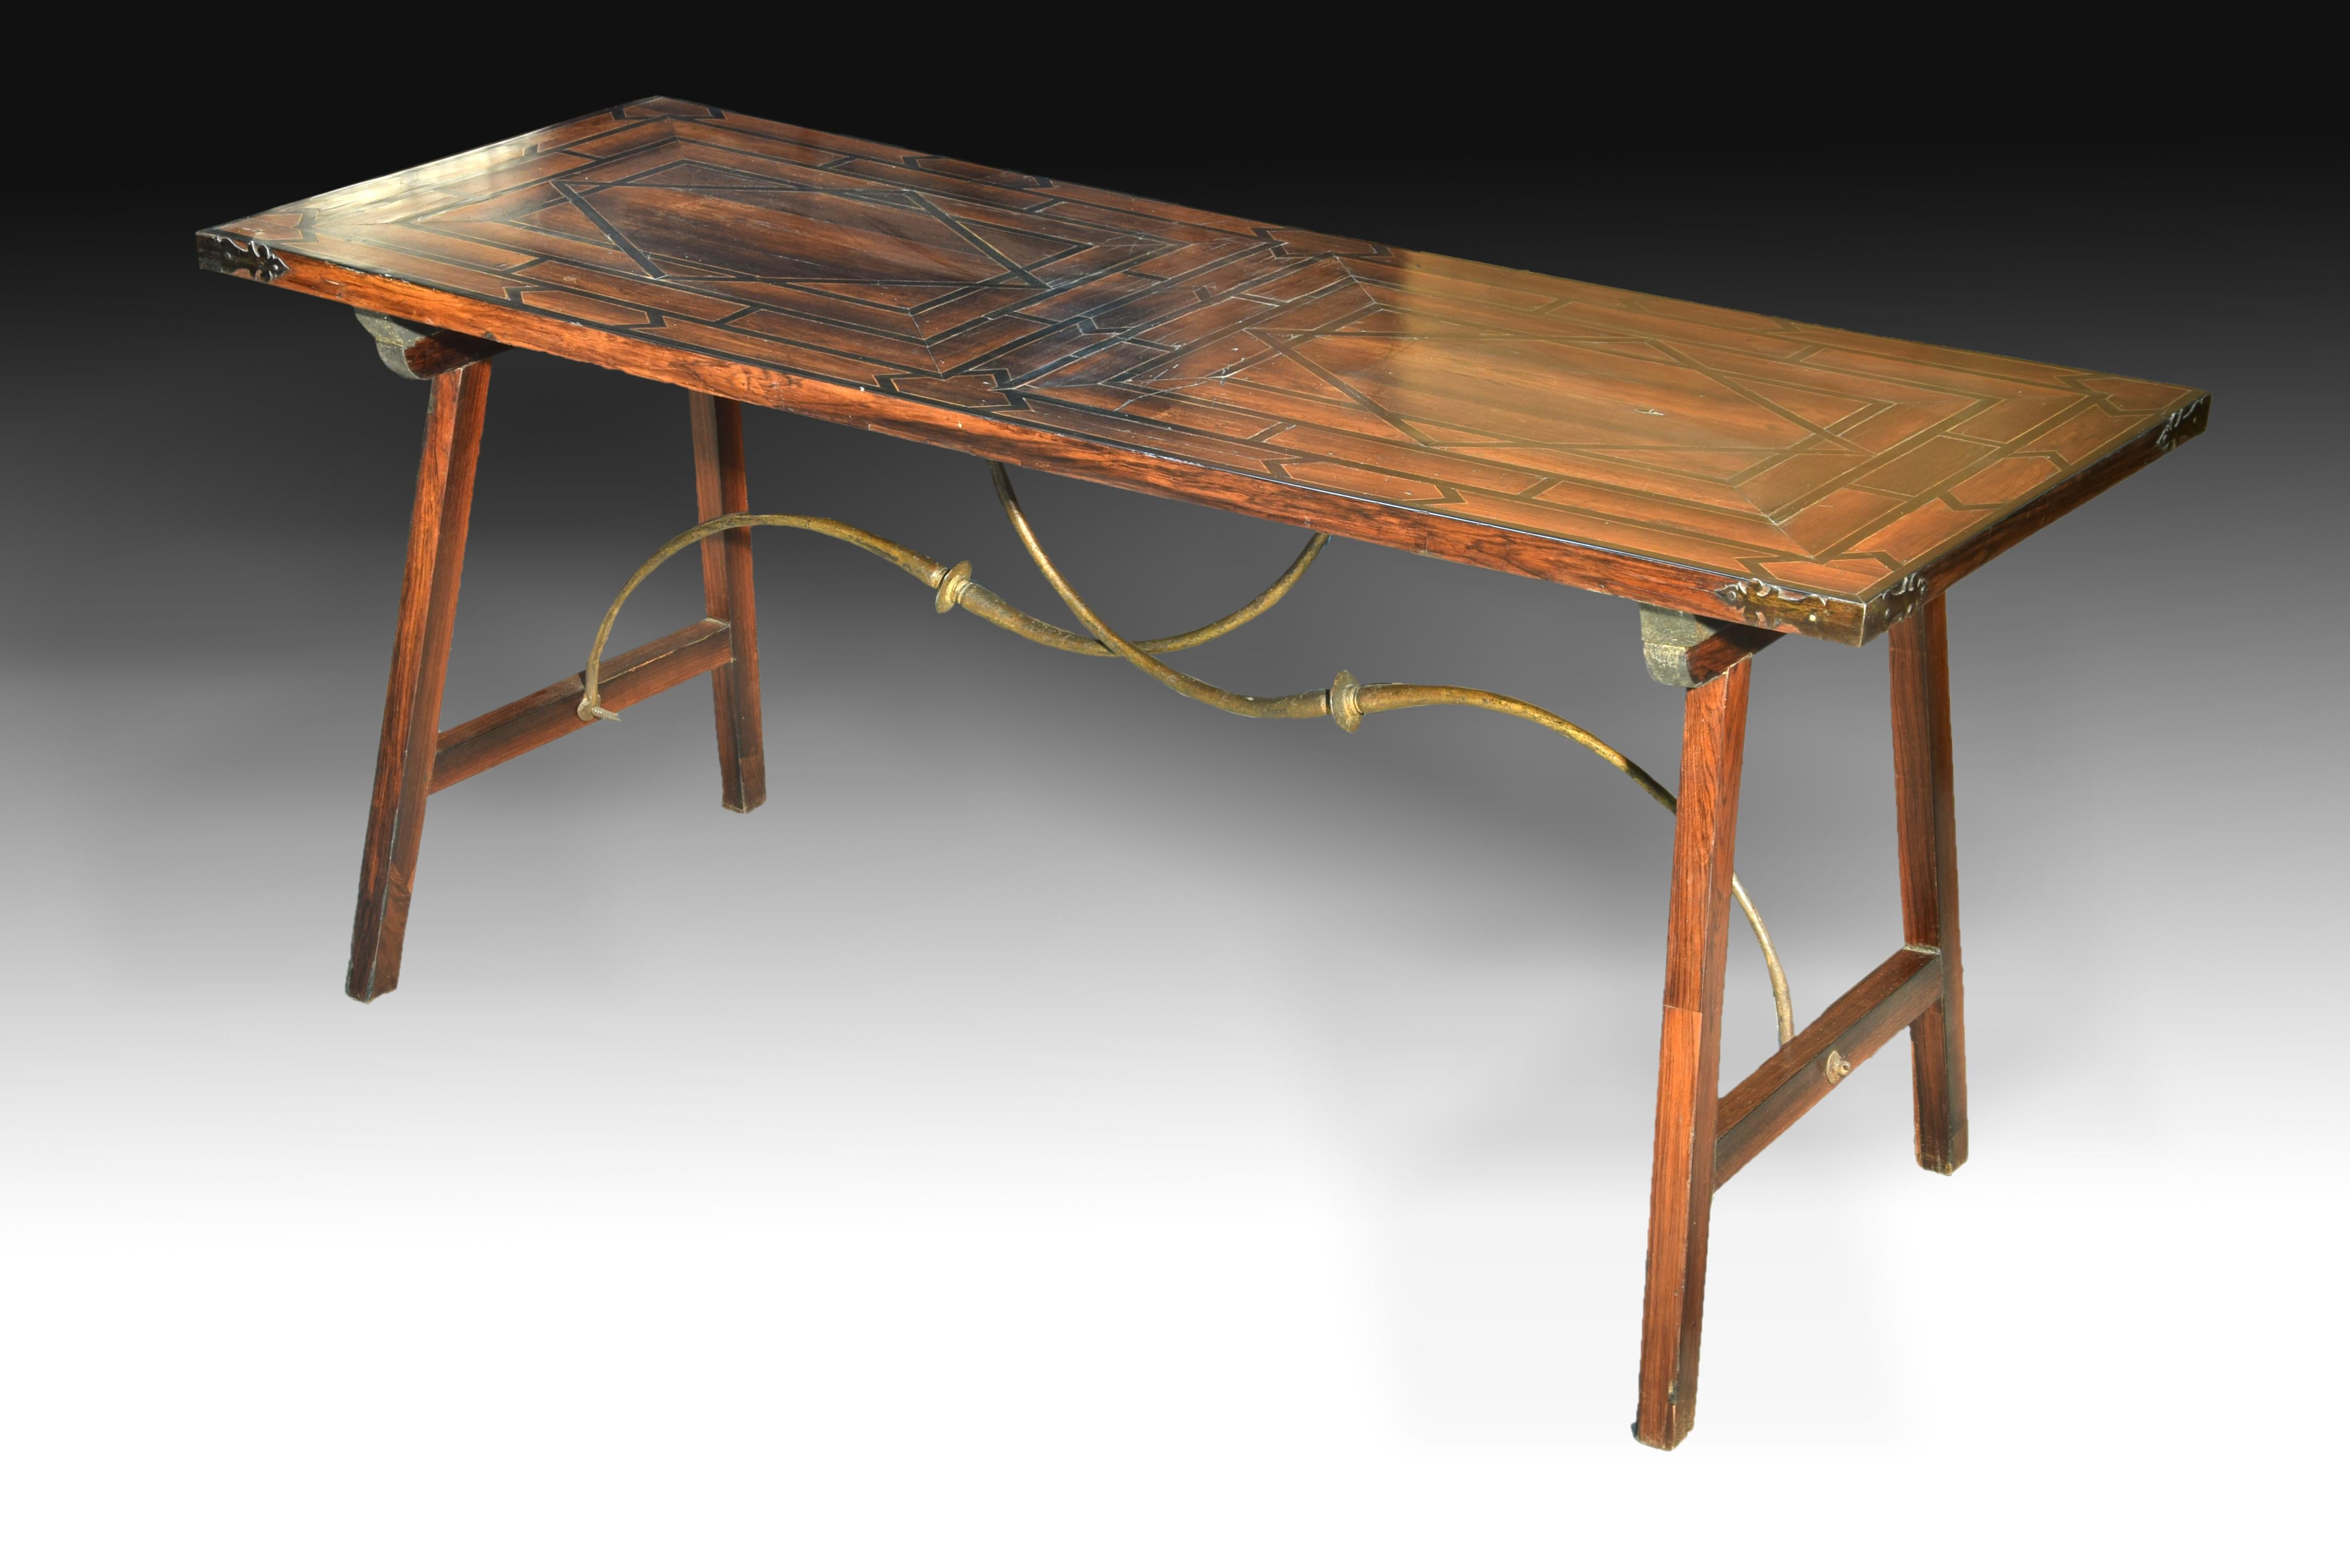 Table for an Spanish writting desk (bargueño) with 